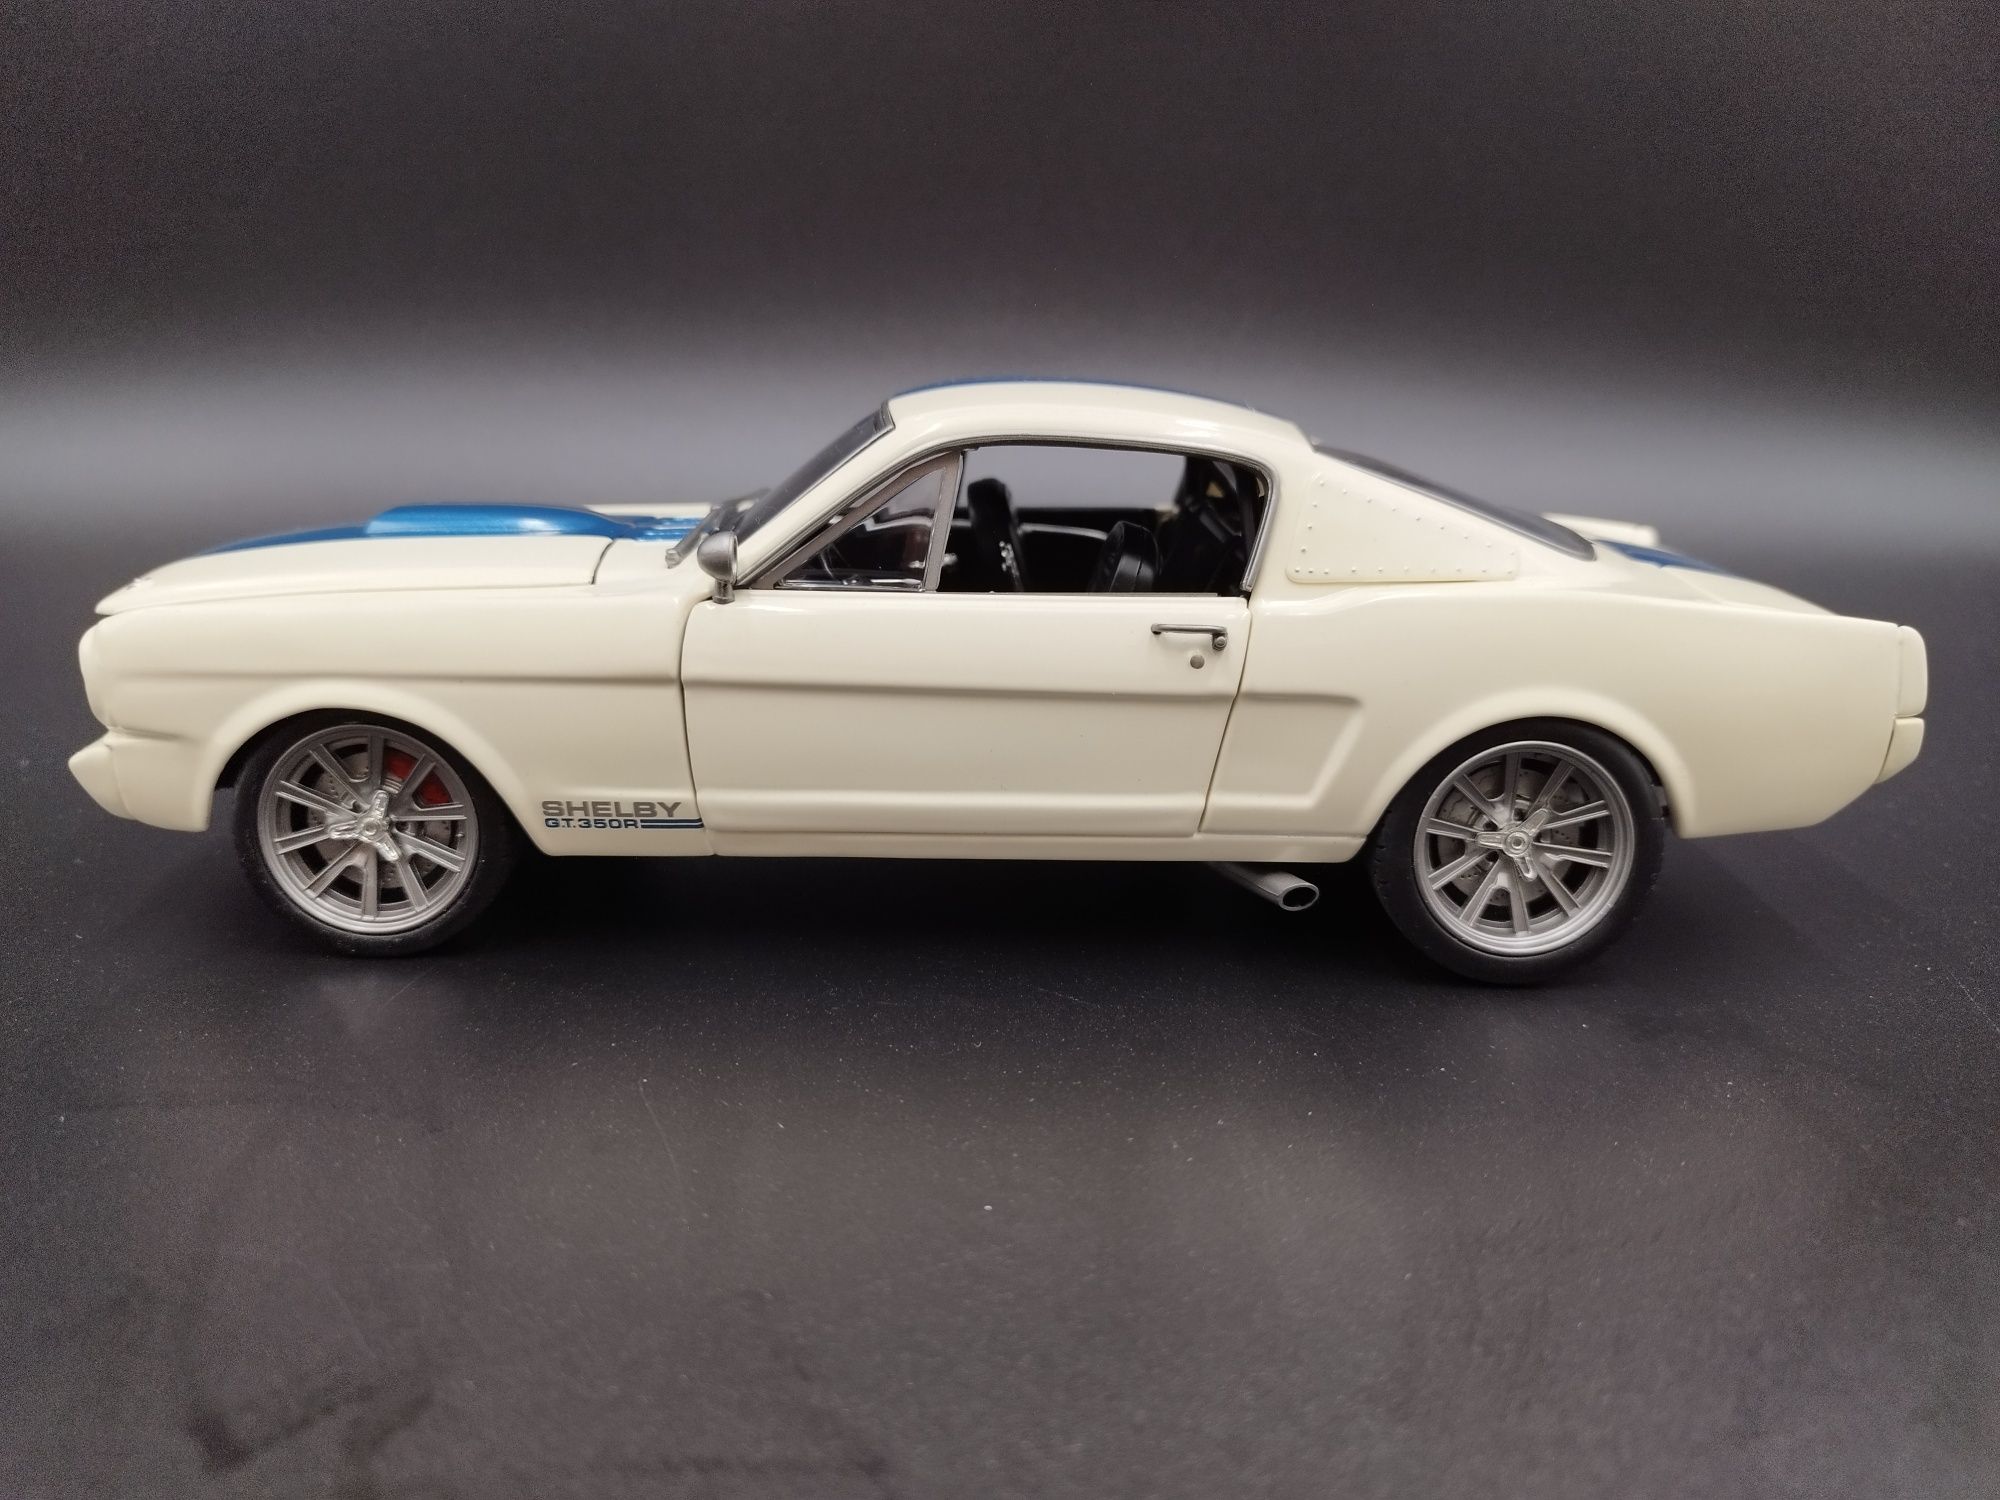 1:18 ACME Ford Mustang Shelby G.T 350R Street Fighter model